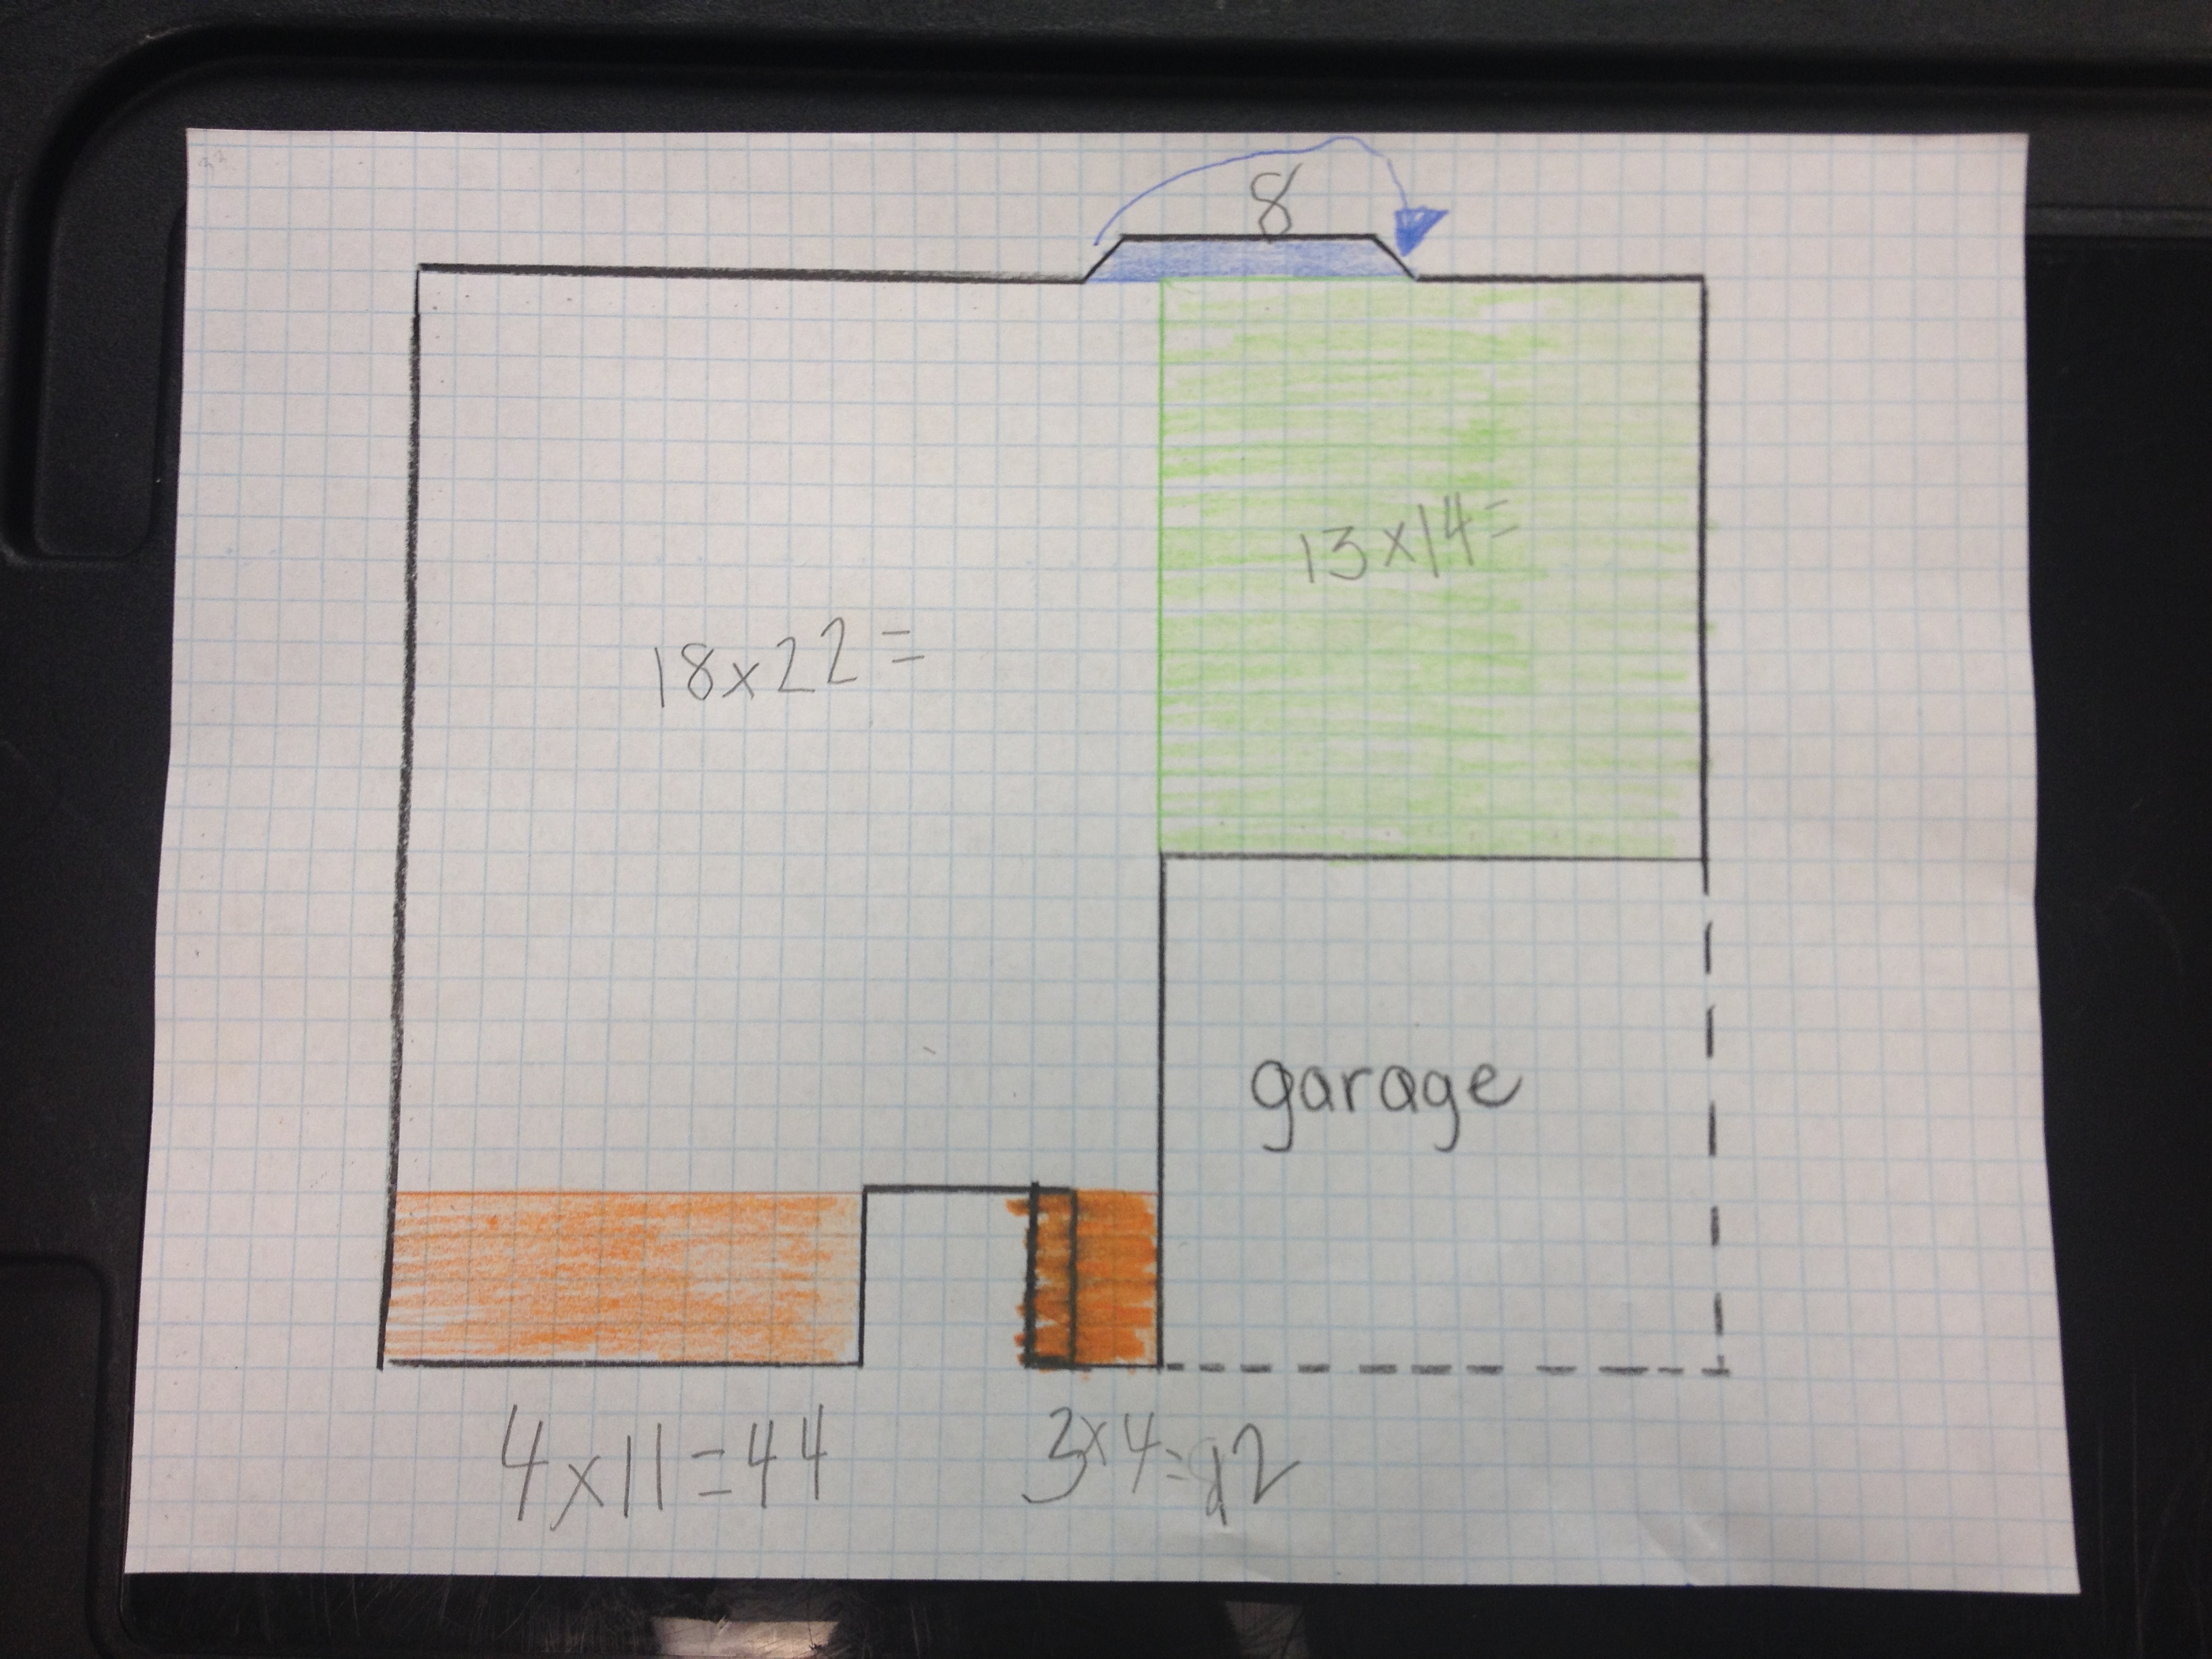 Use of graph paper to represent their house